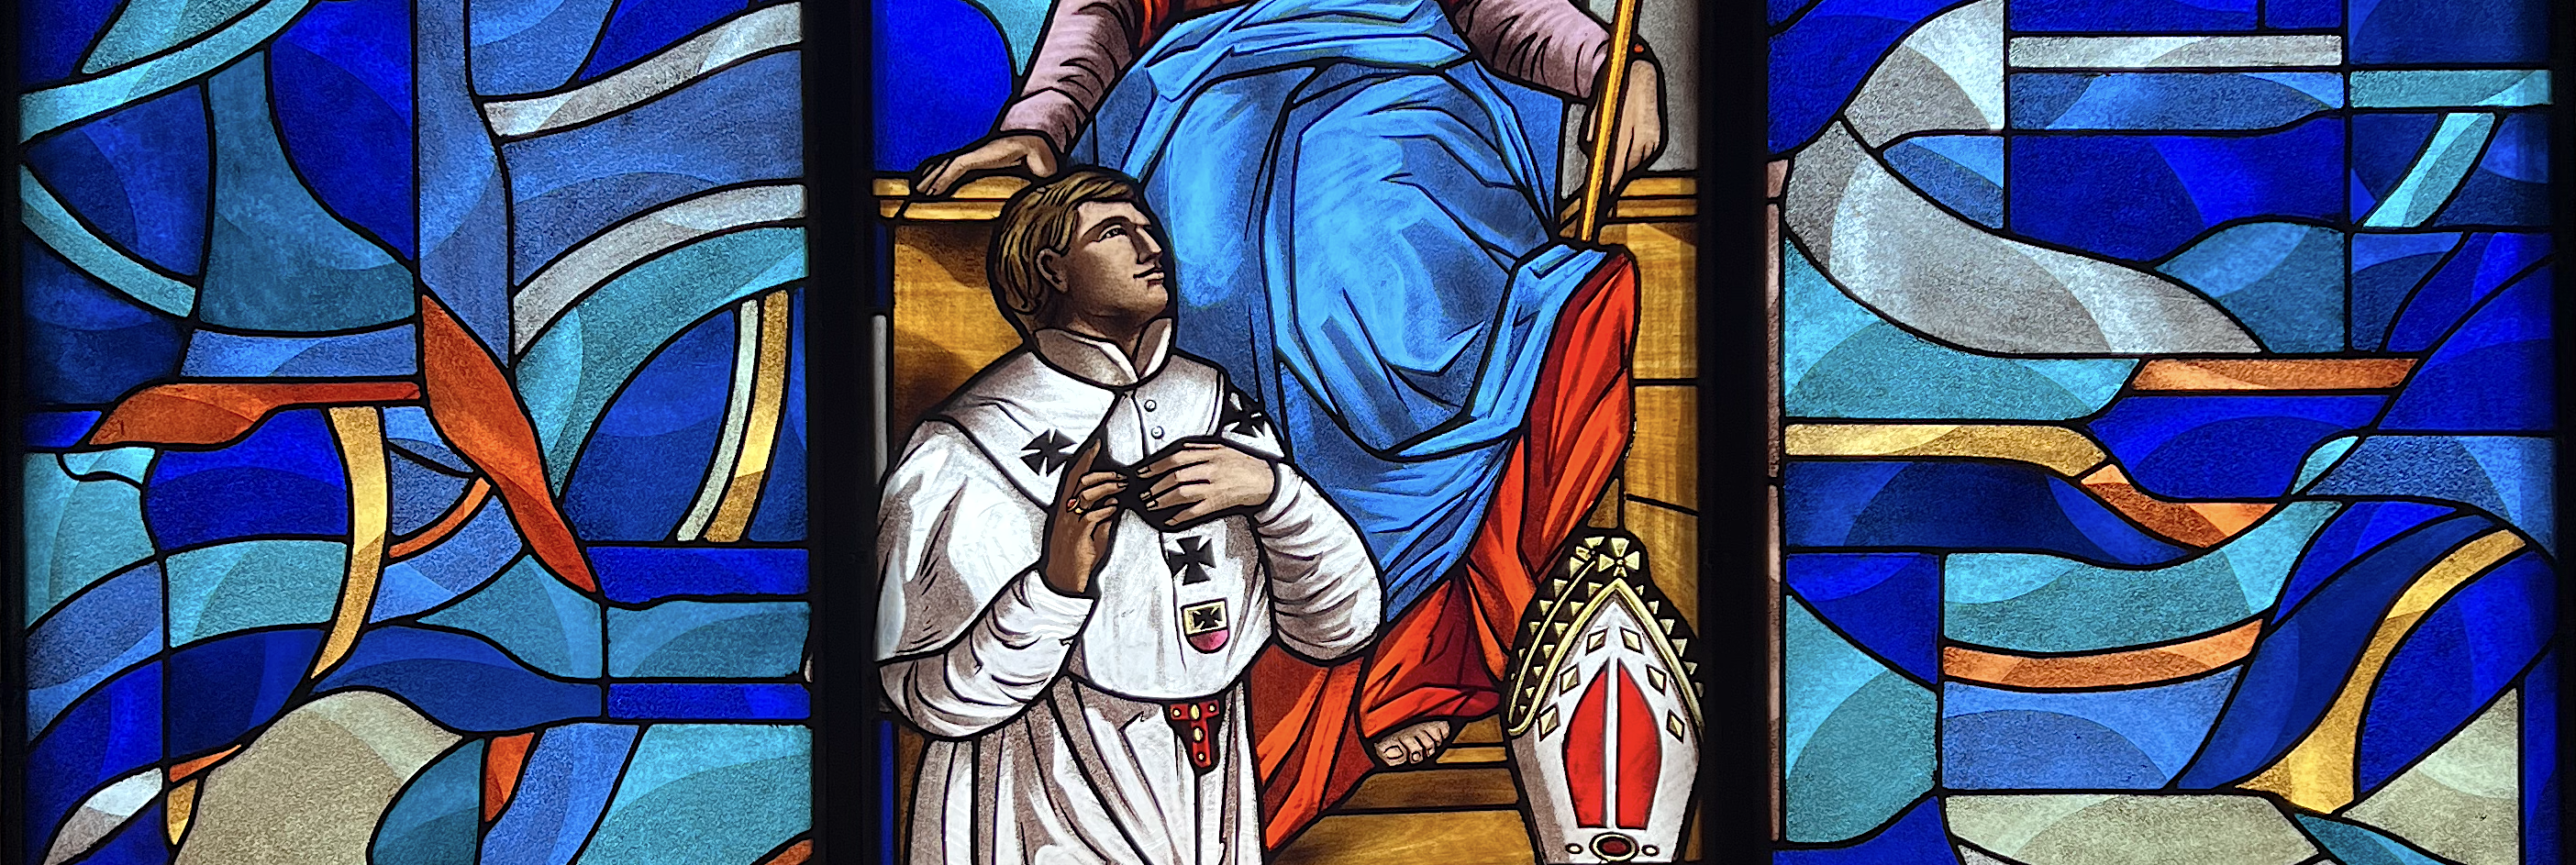 St. Norbert Stain glass